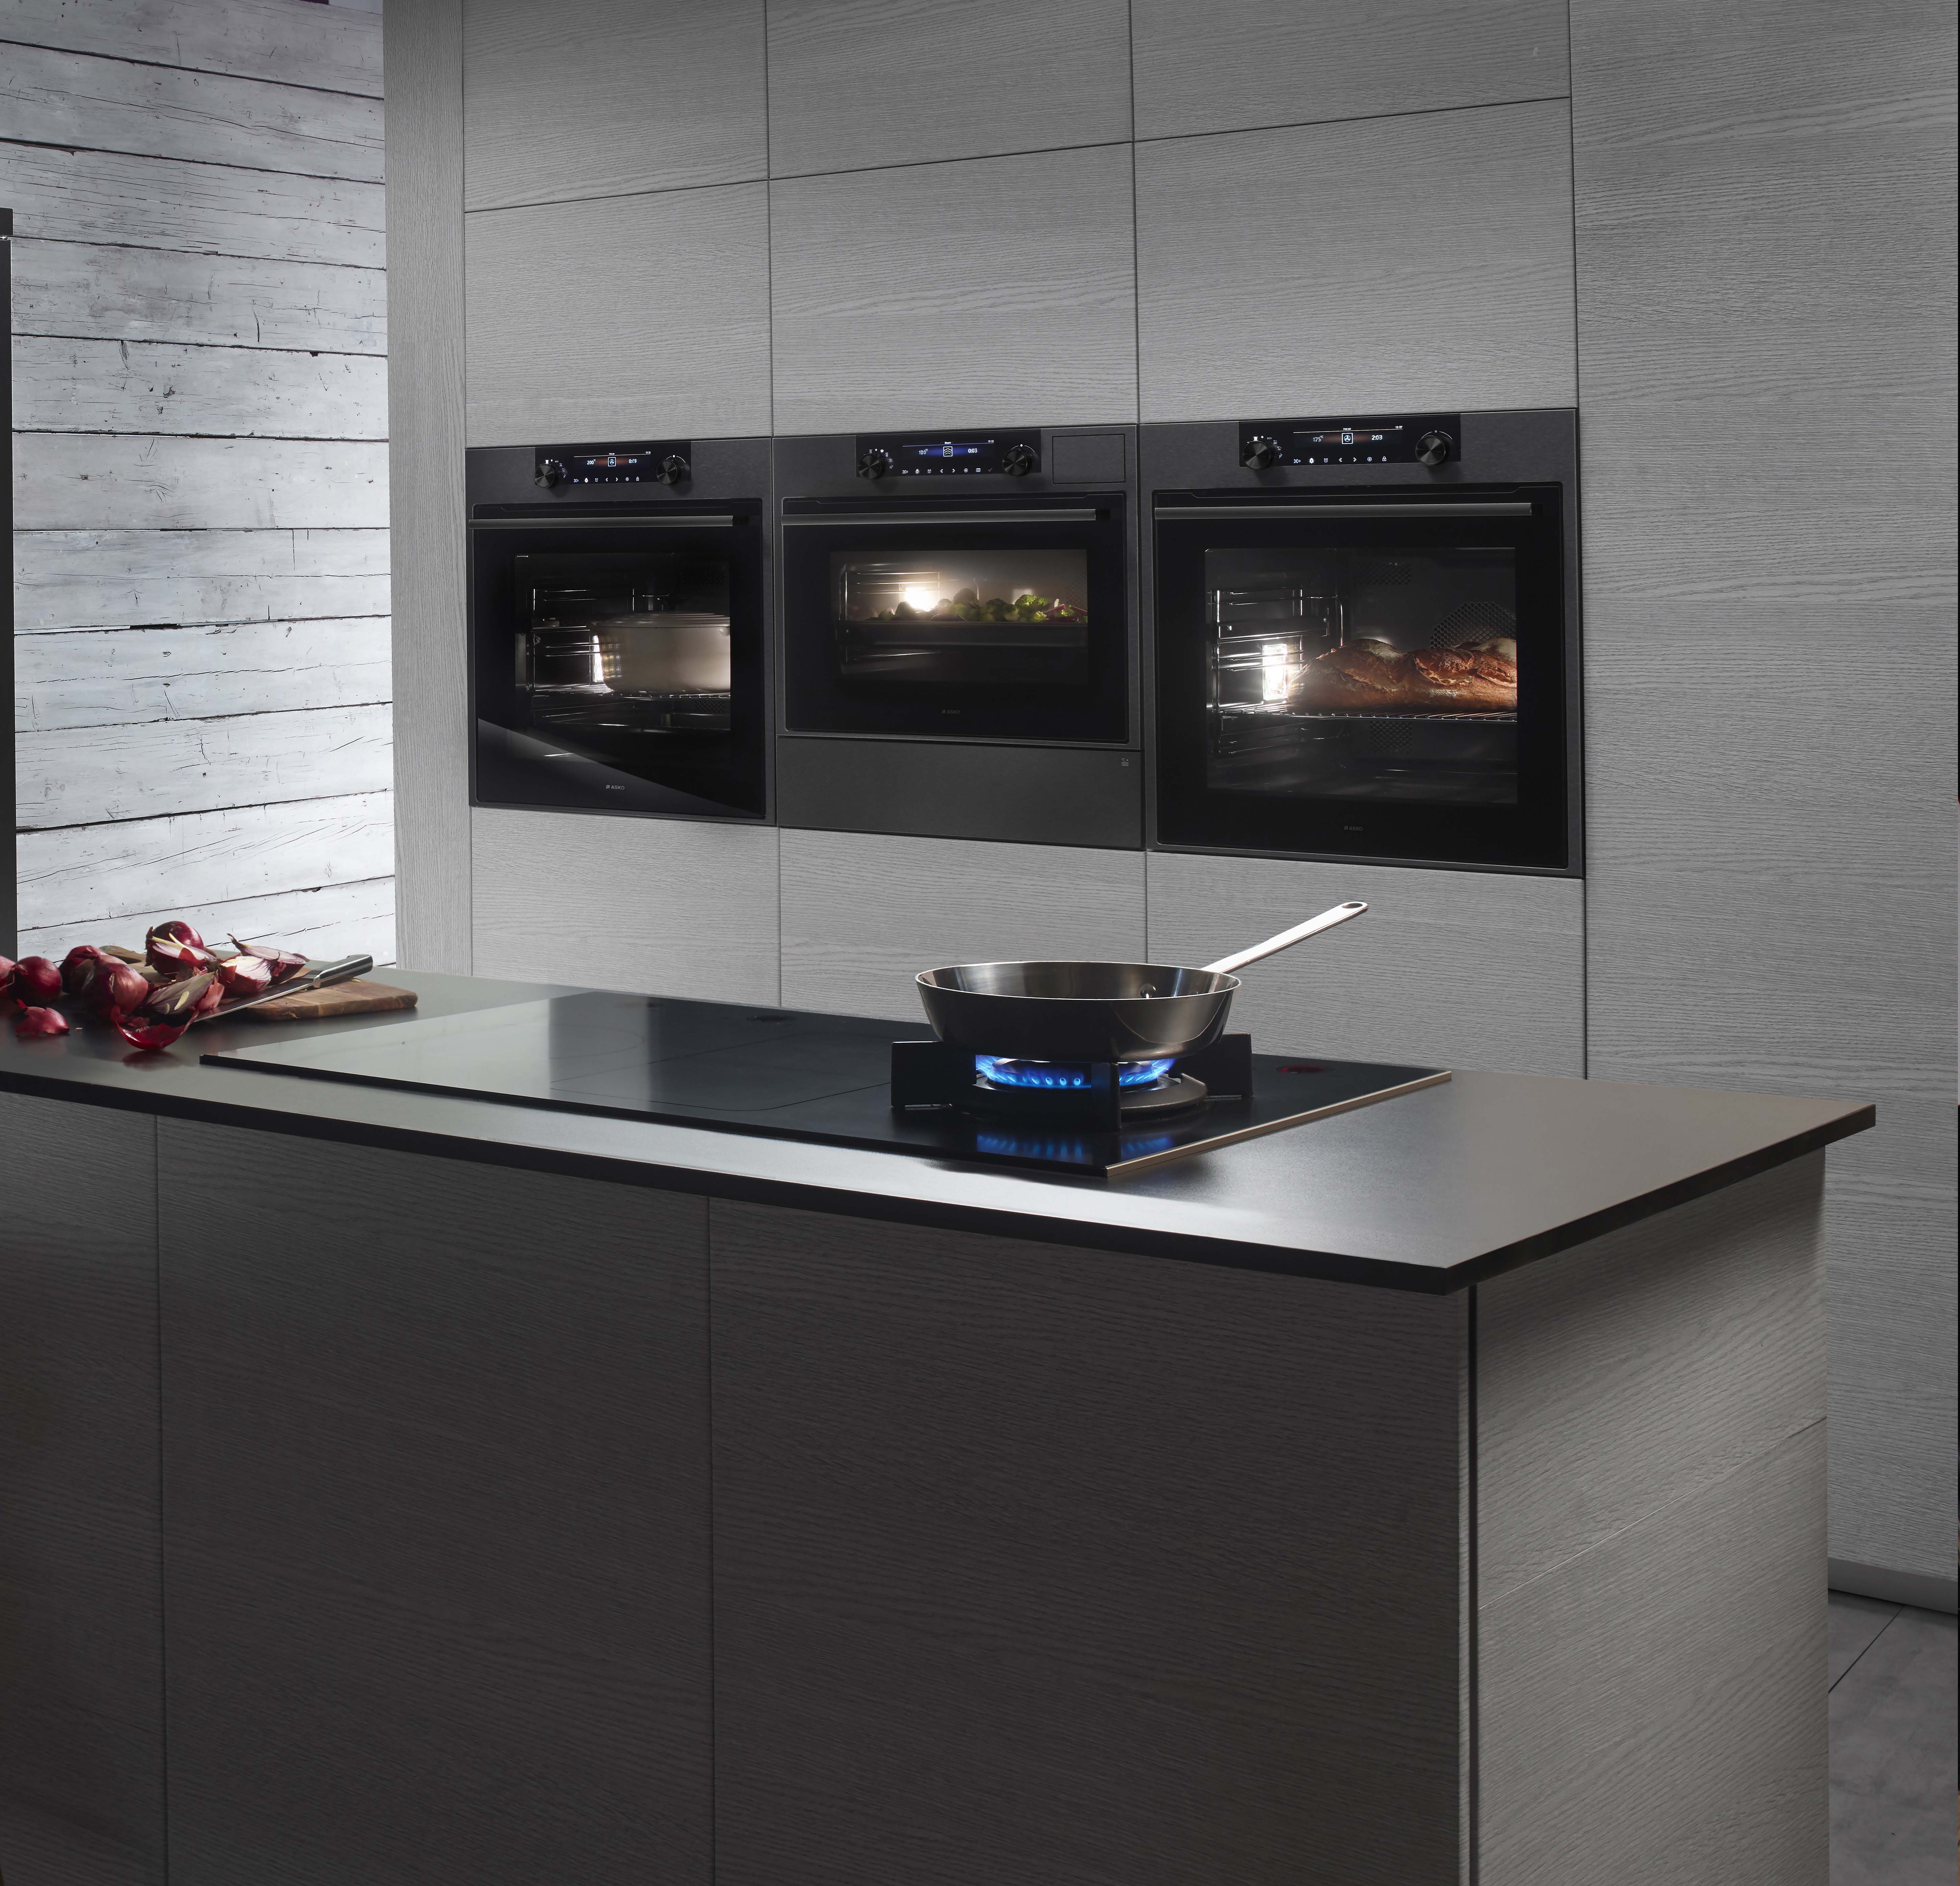 Save Up To 15% On ASKO Kitchen Packages* at Hart & Co